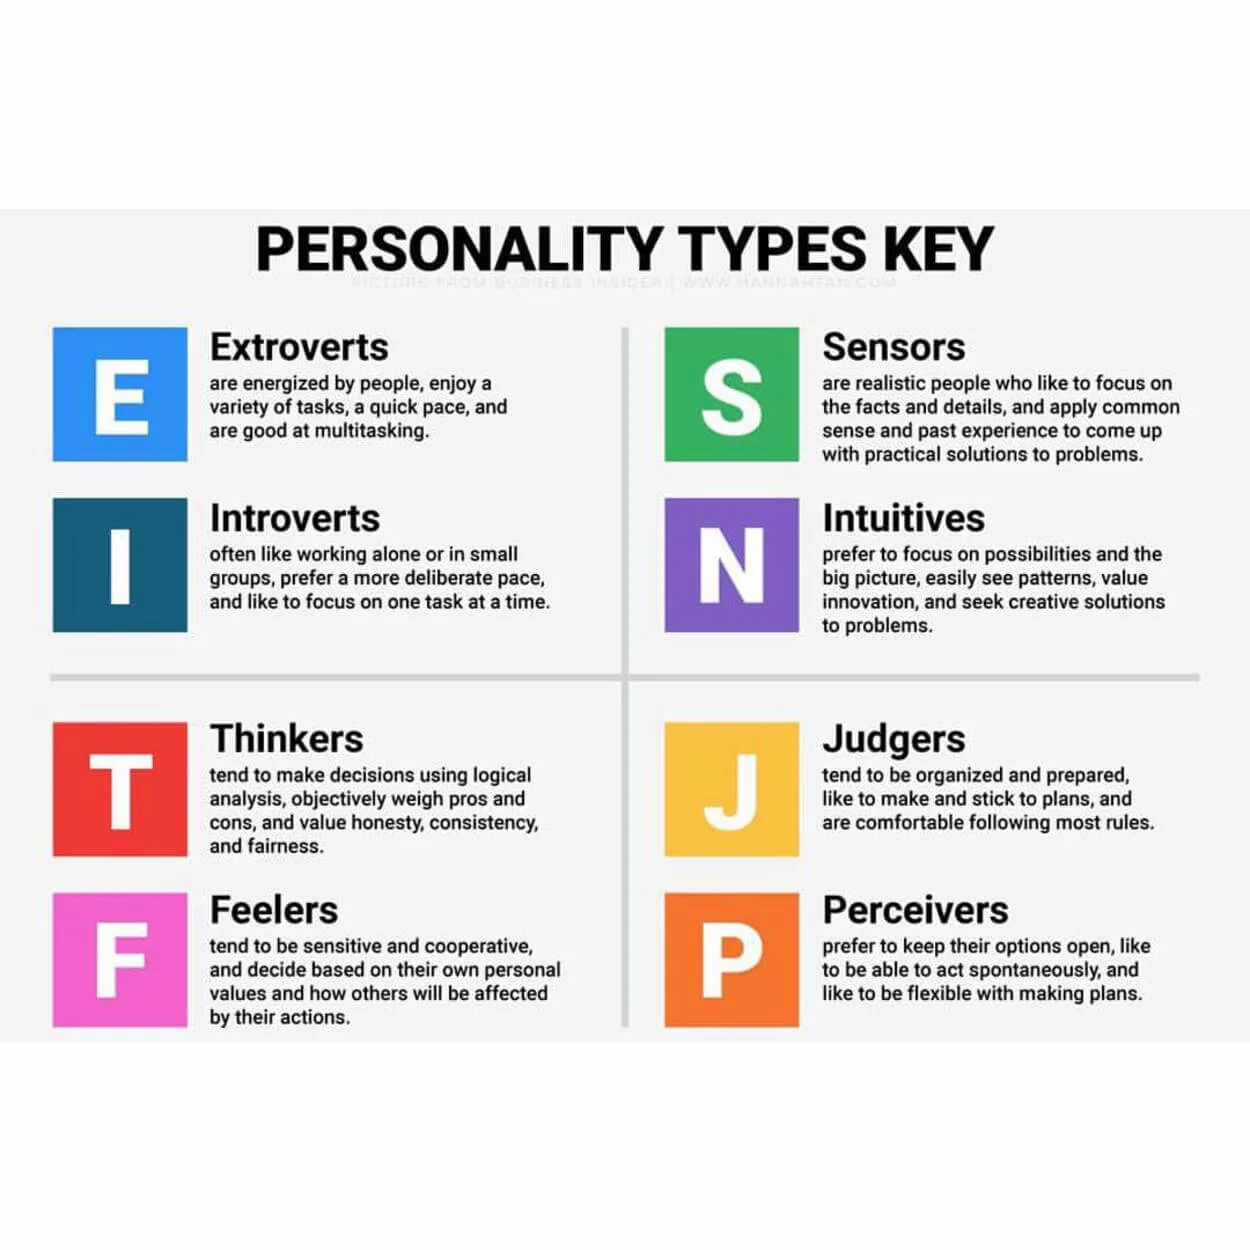 An image of key of acronyms of all personality types.